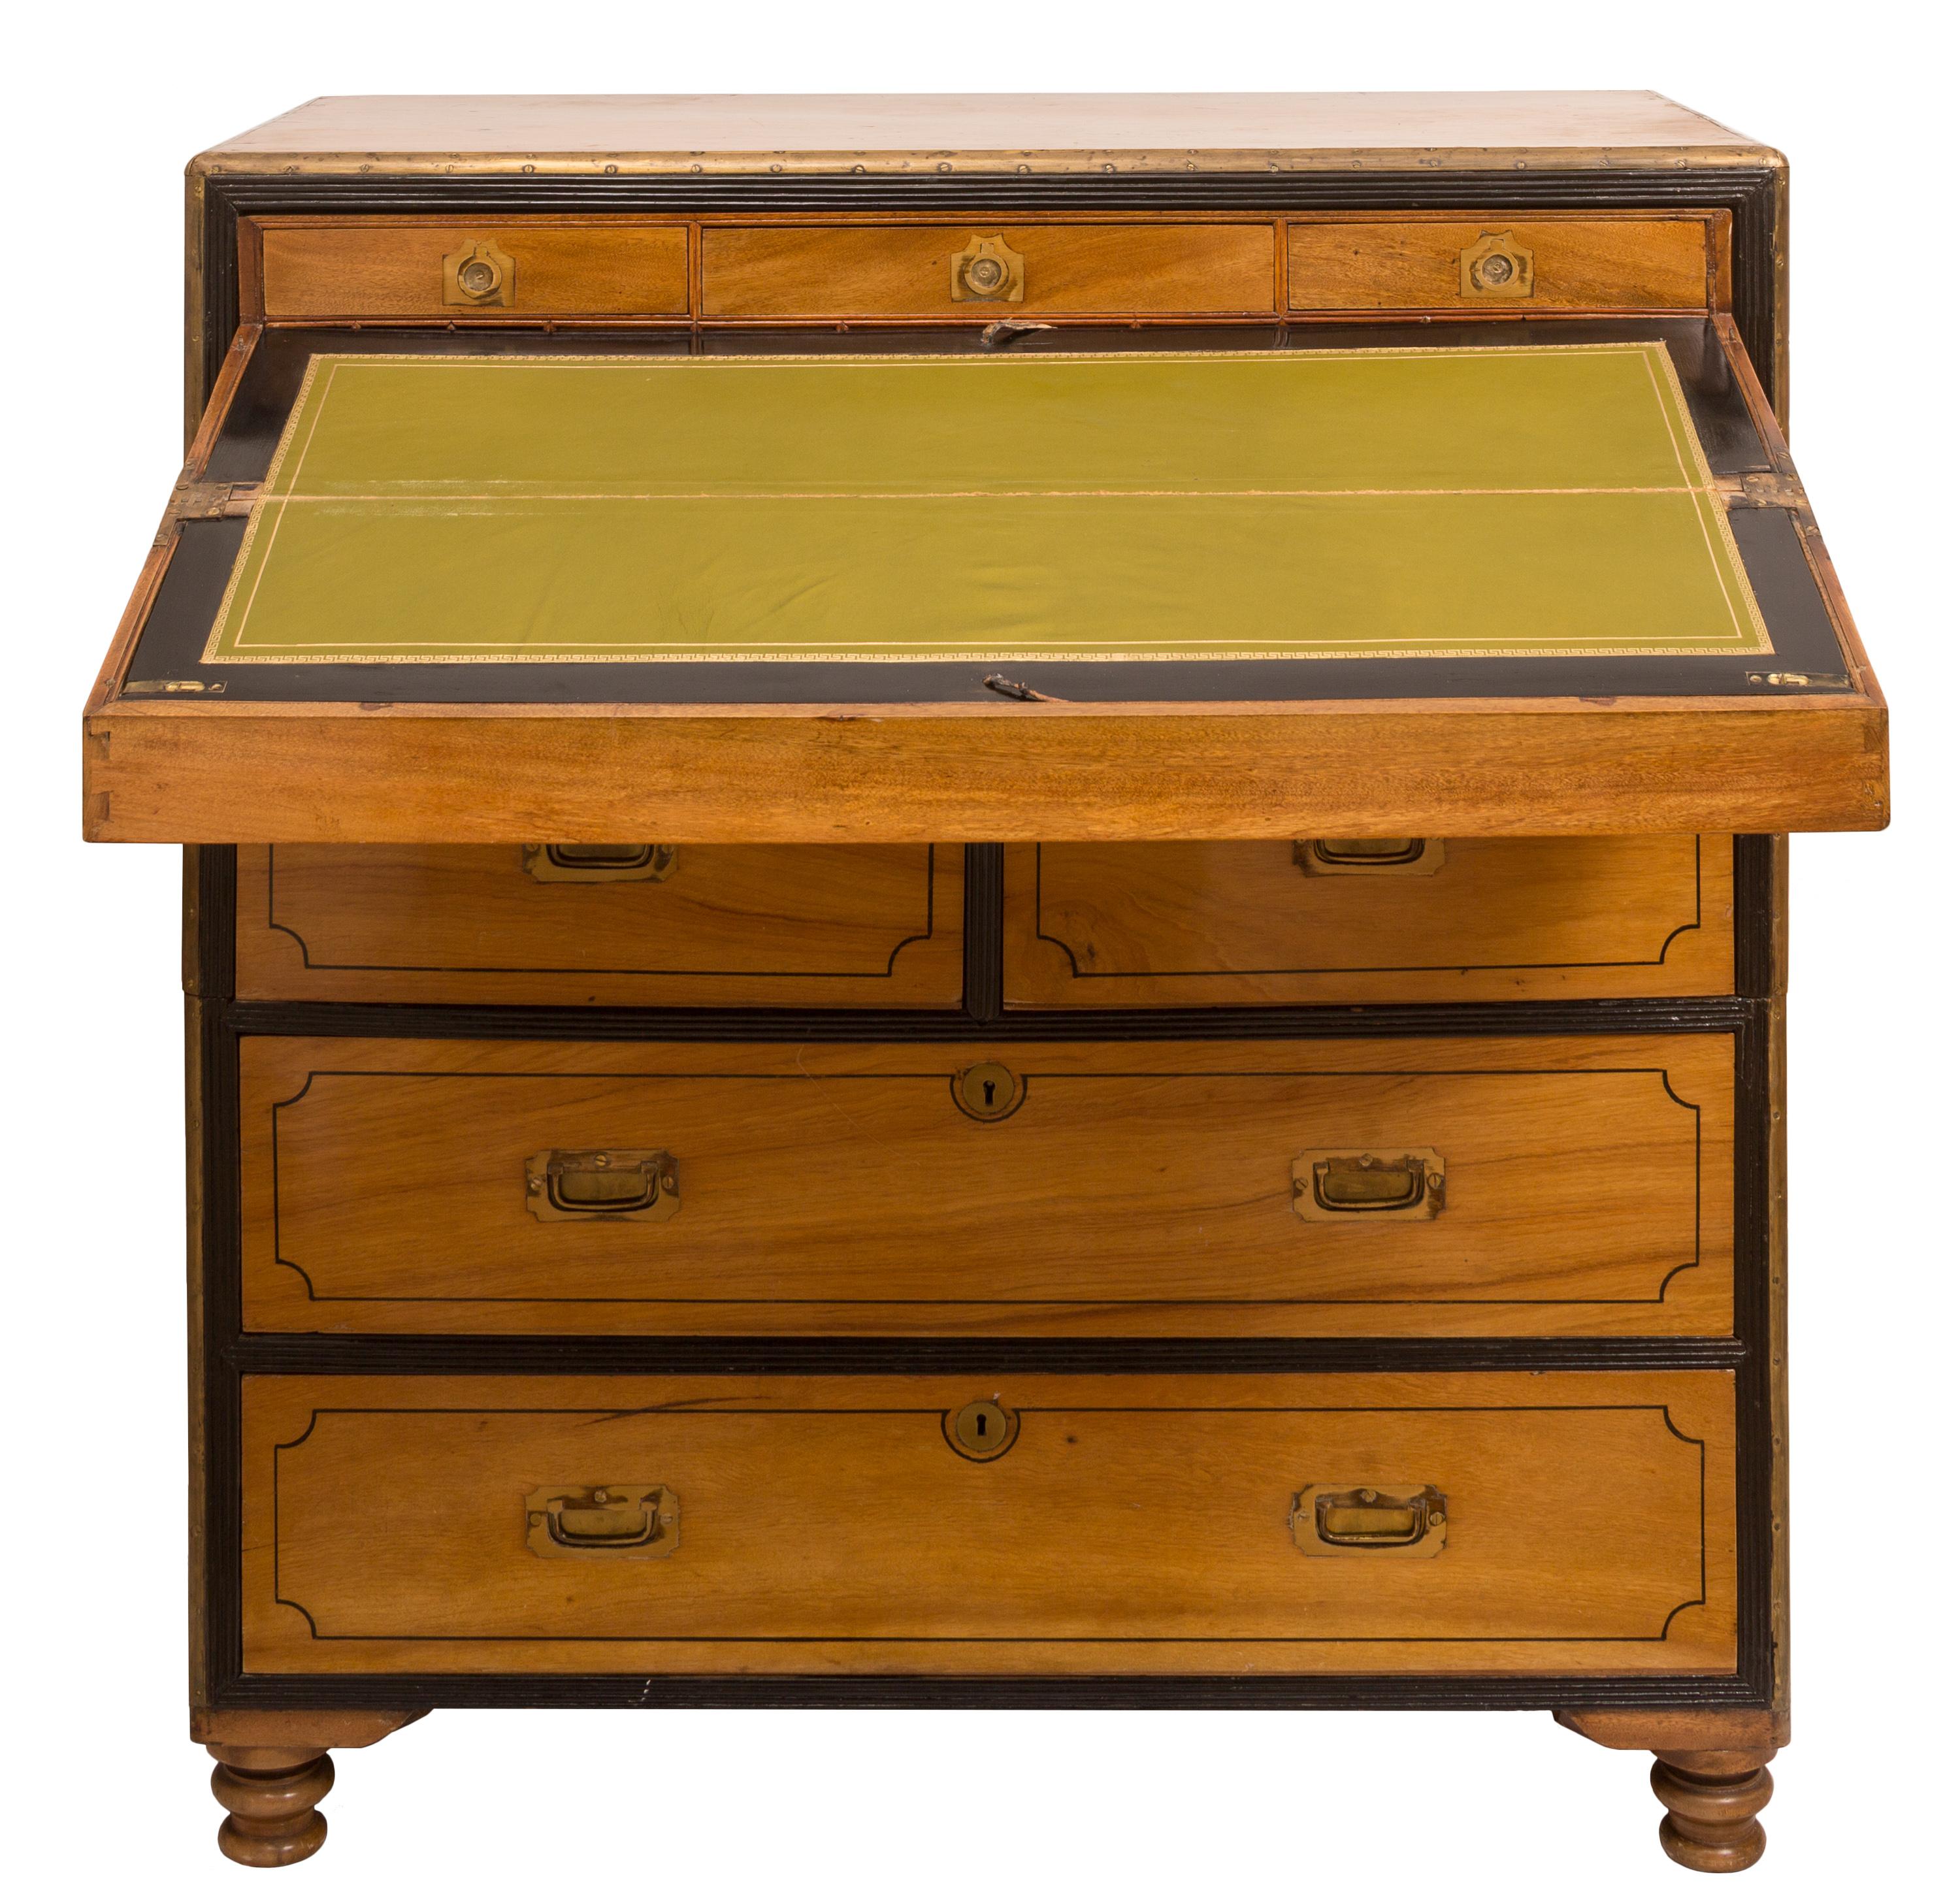 This 19th century camphor wood British military Campaign two-piece chest of drawers features a hidden fold-out writing desk. The attractive 